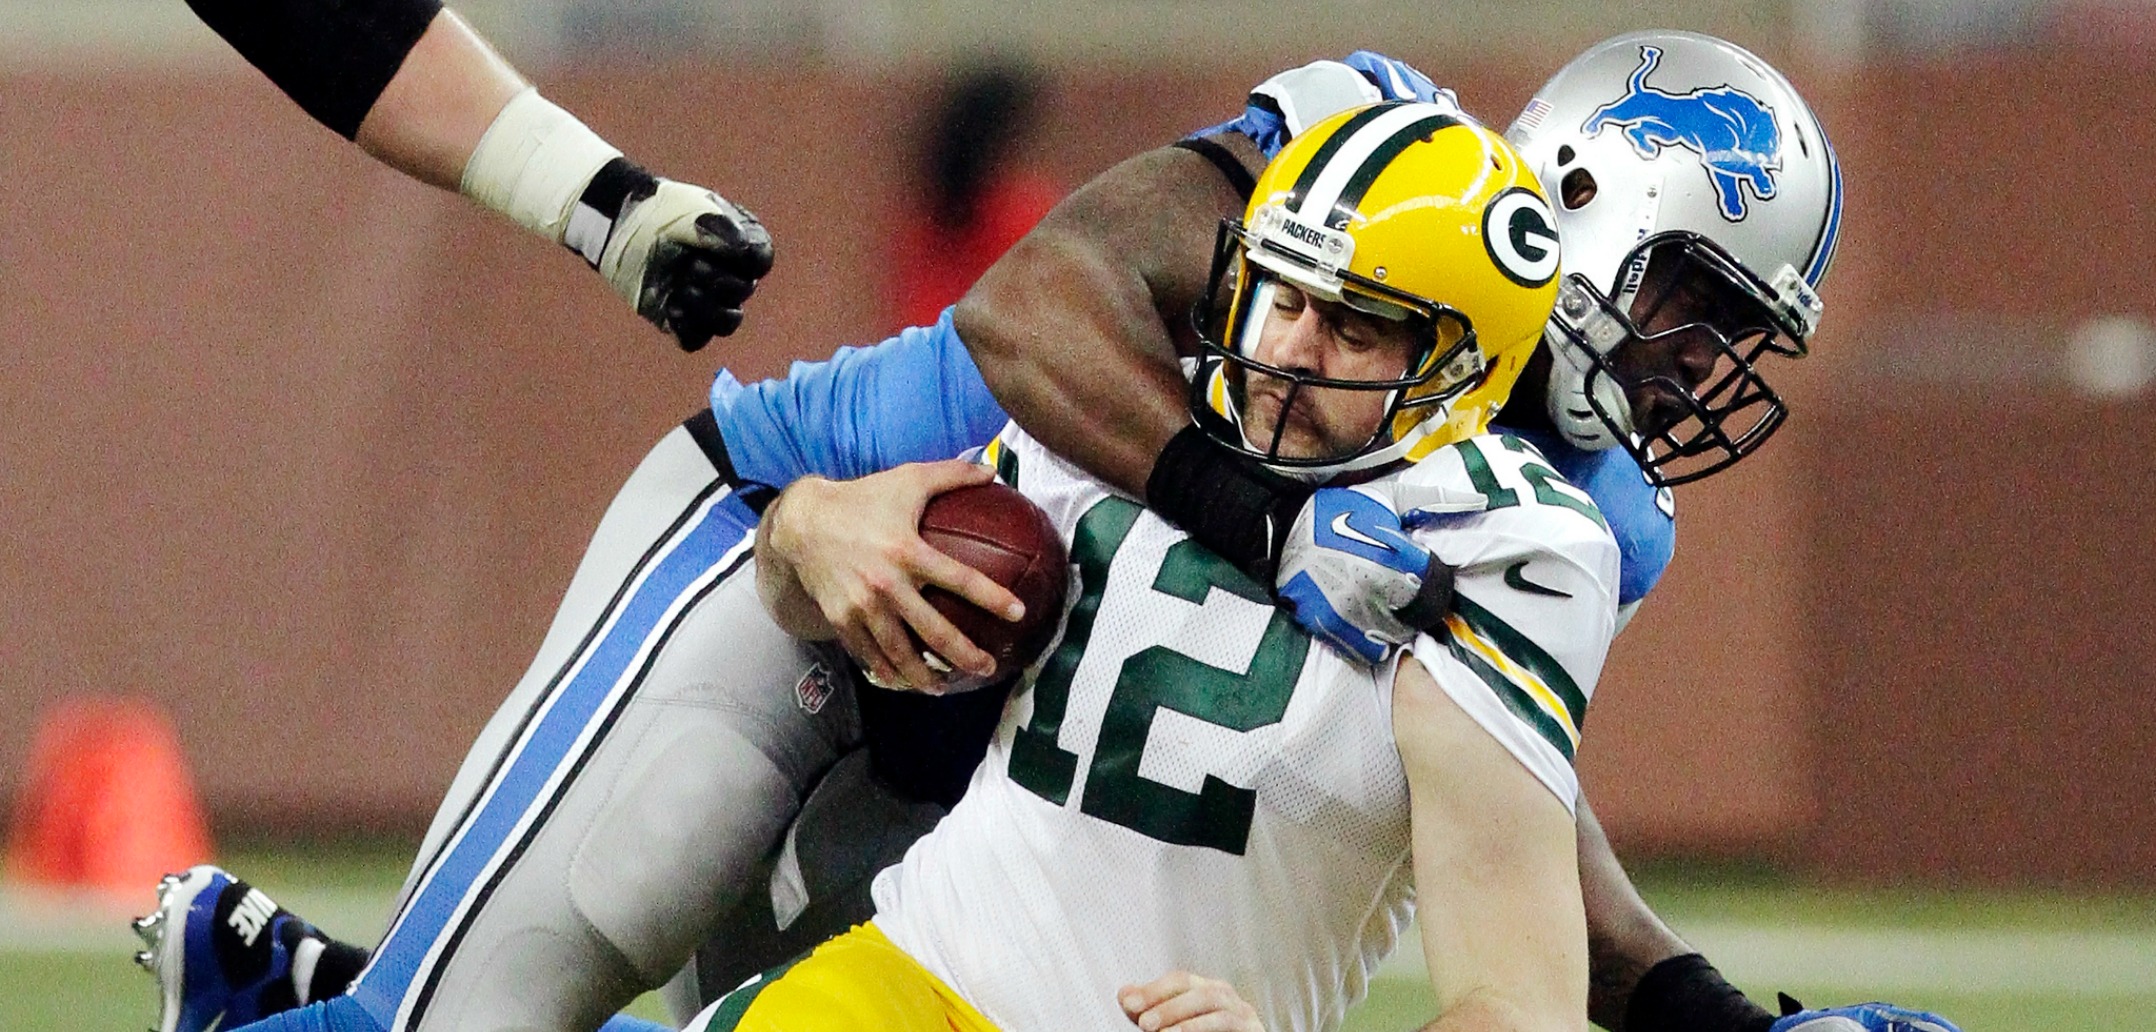 Courtesy of USA Today: If Rodgers stays upright, the Packers will beat Detroit. 